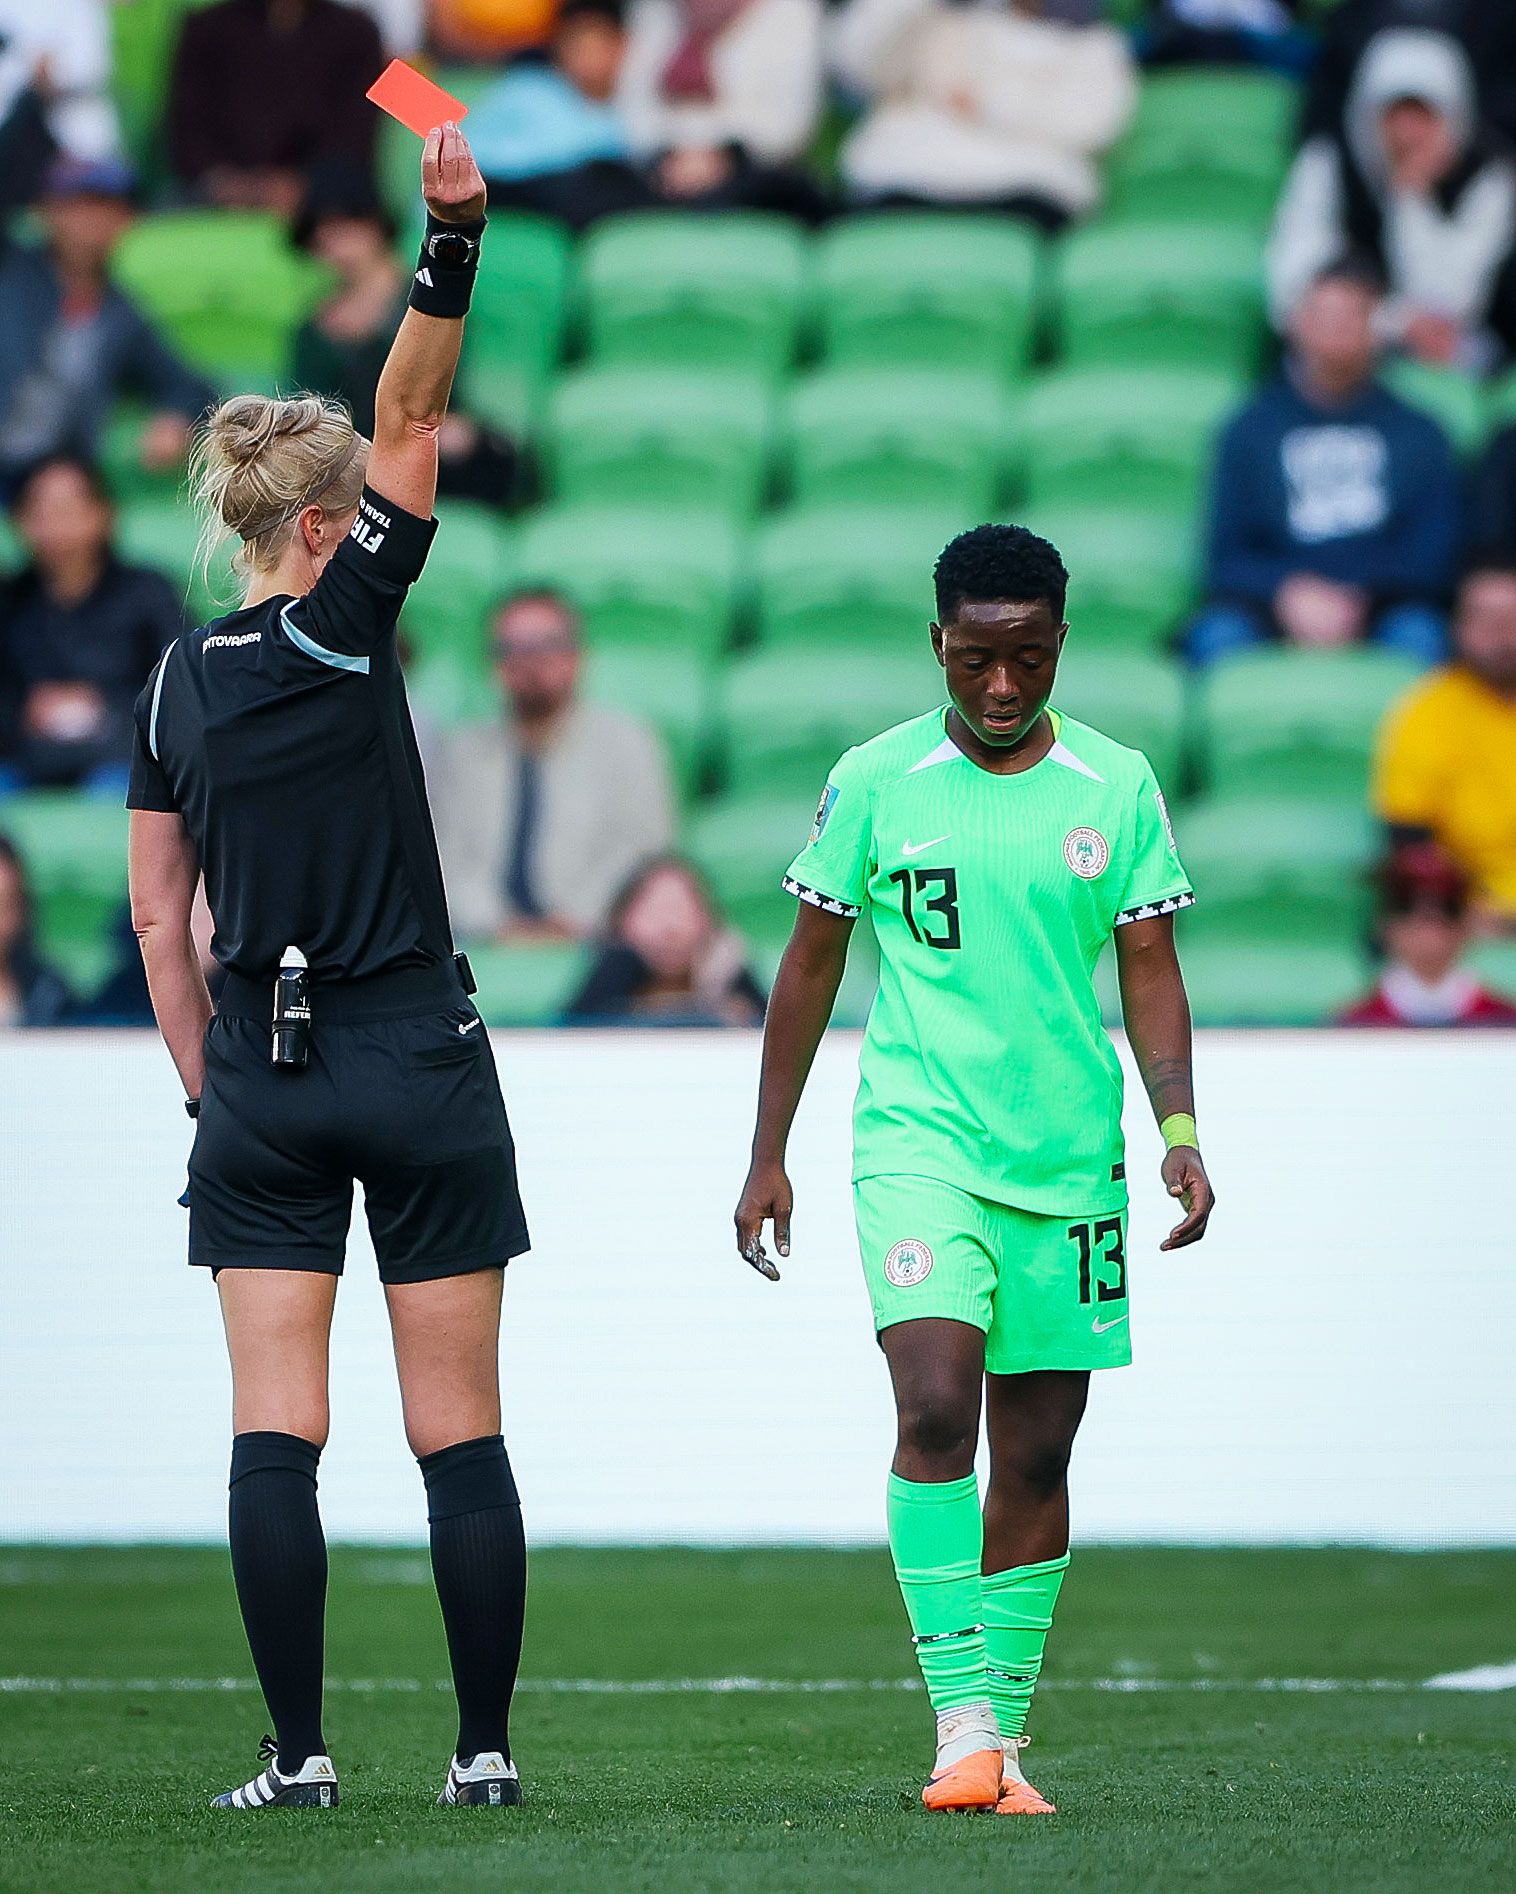 Deborah Abiodun received the first red card of the tournament